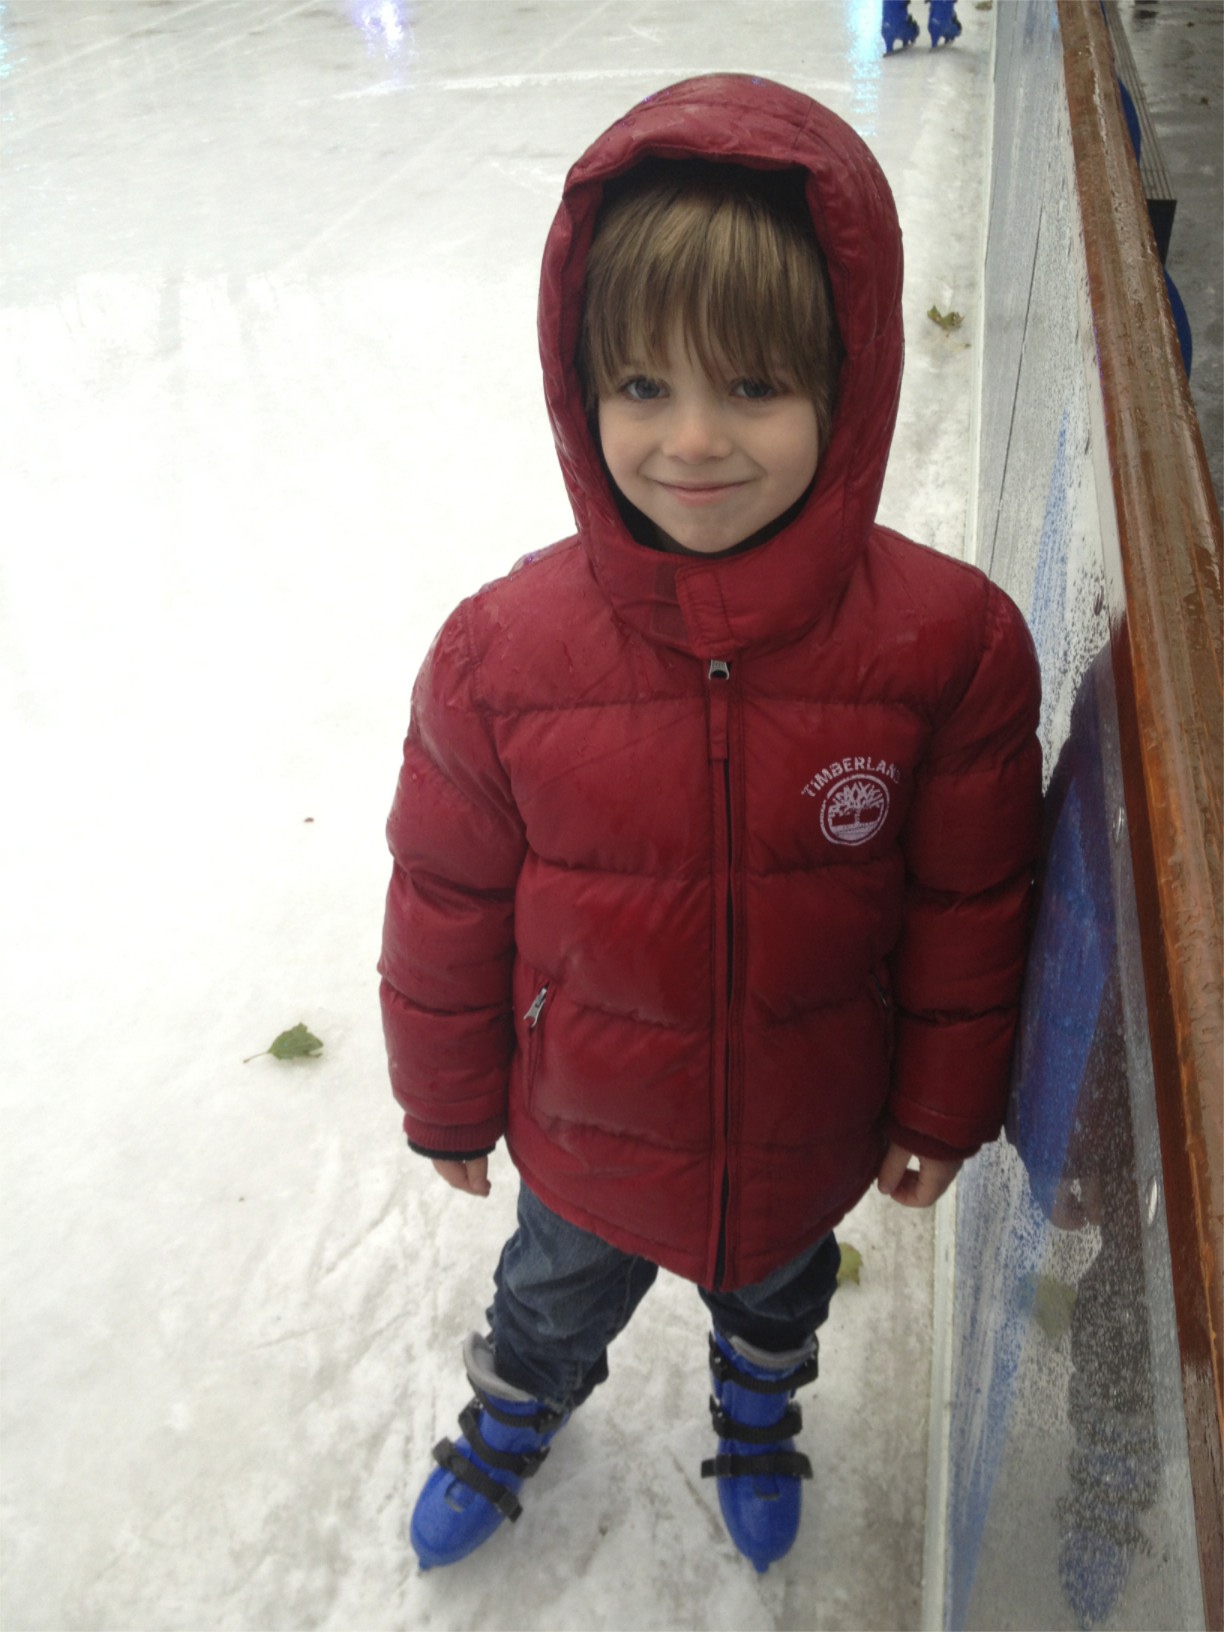 I took Luca out for a day on his own. We went ice skating in the pouring rain. We now both have colds but it was worth it!